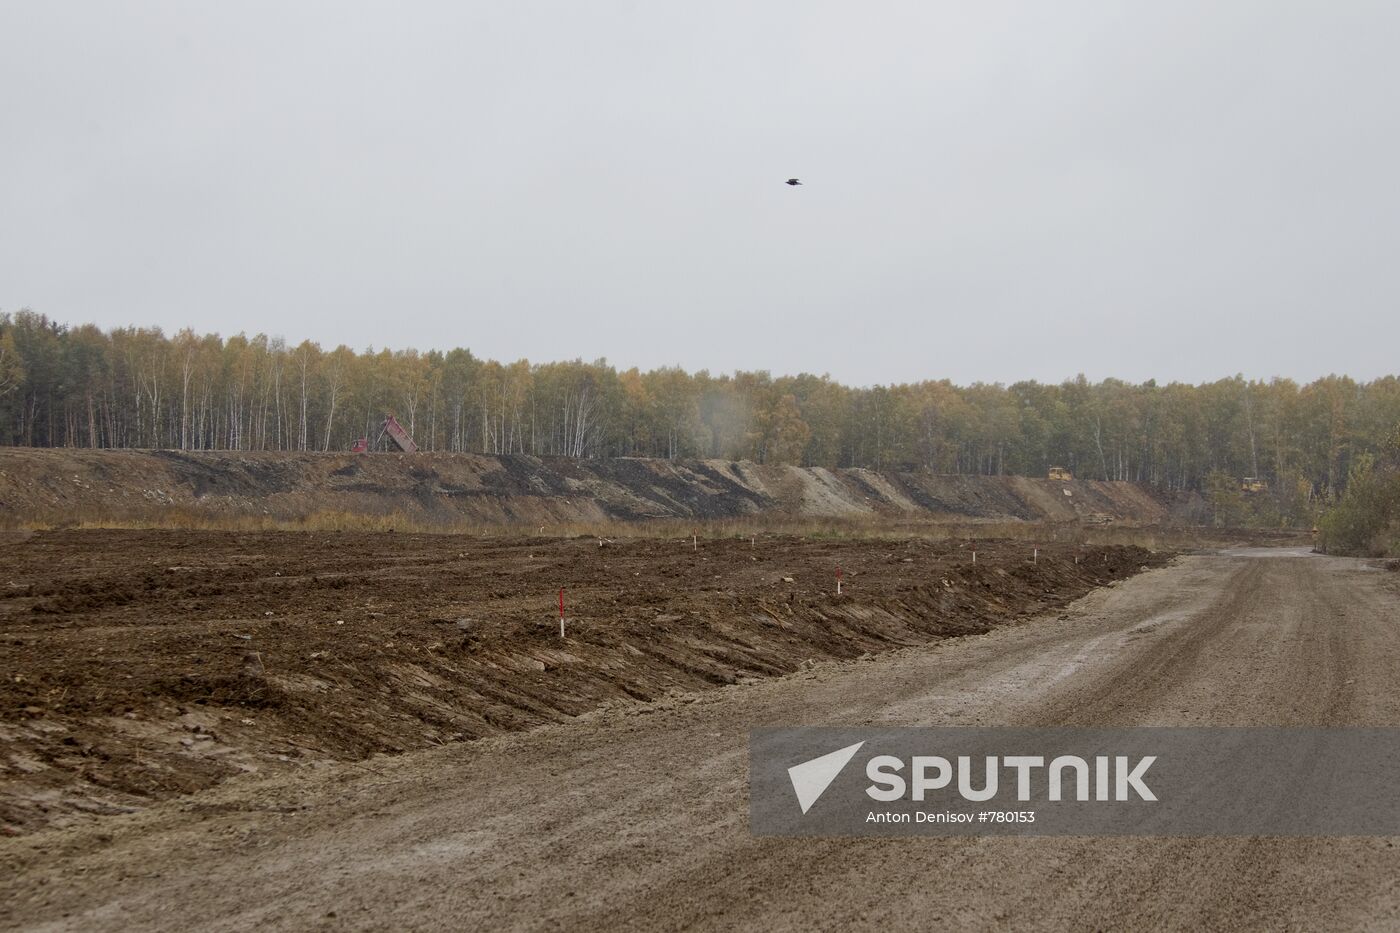 Initial construction of a new Moscow - St. Petersburg highway